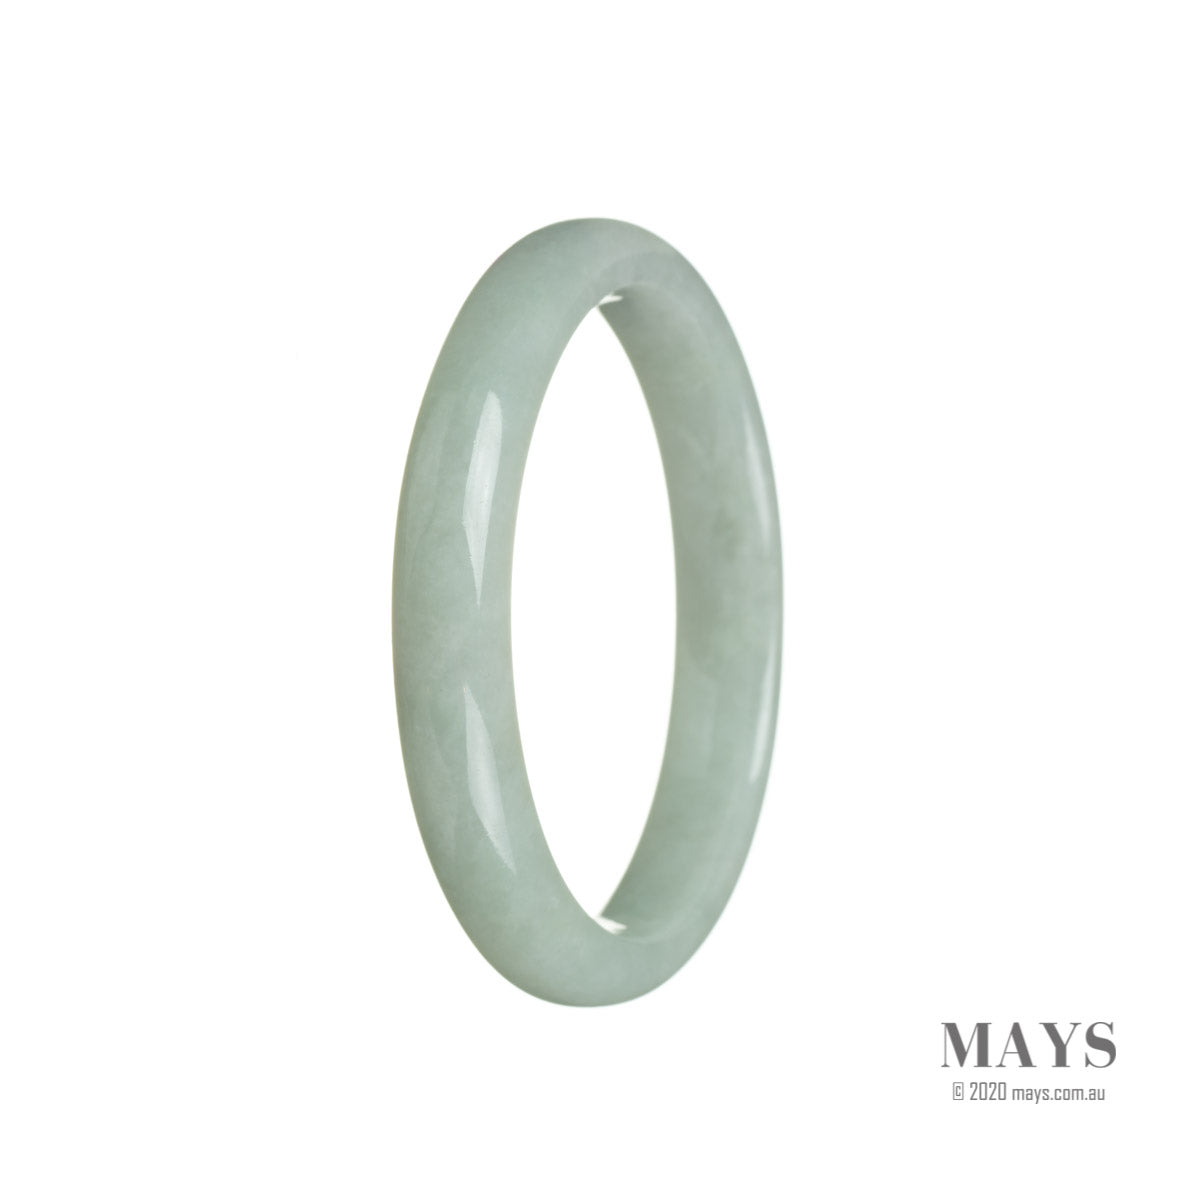 A close-up photo of a light green jadeite bangle, certified as untreated. The bangle has a semi-round shape and a diameter of 57mm. It is a beautiful piece of jewelry from MAYS™.